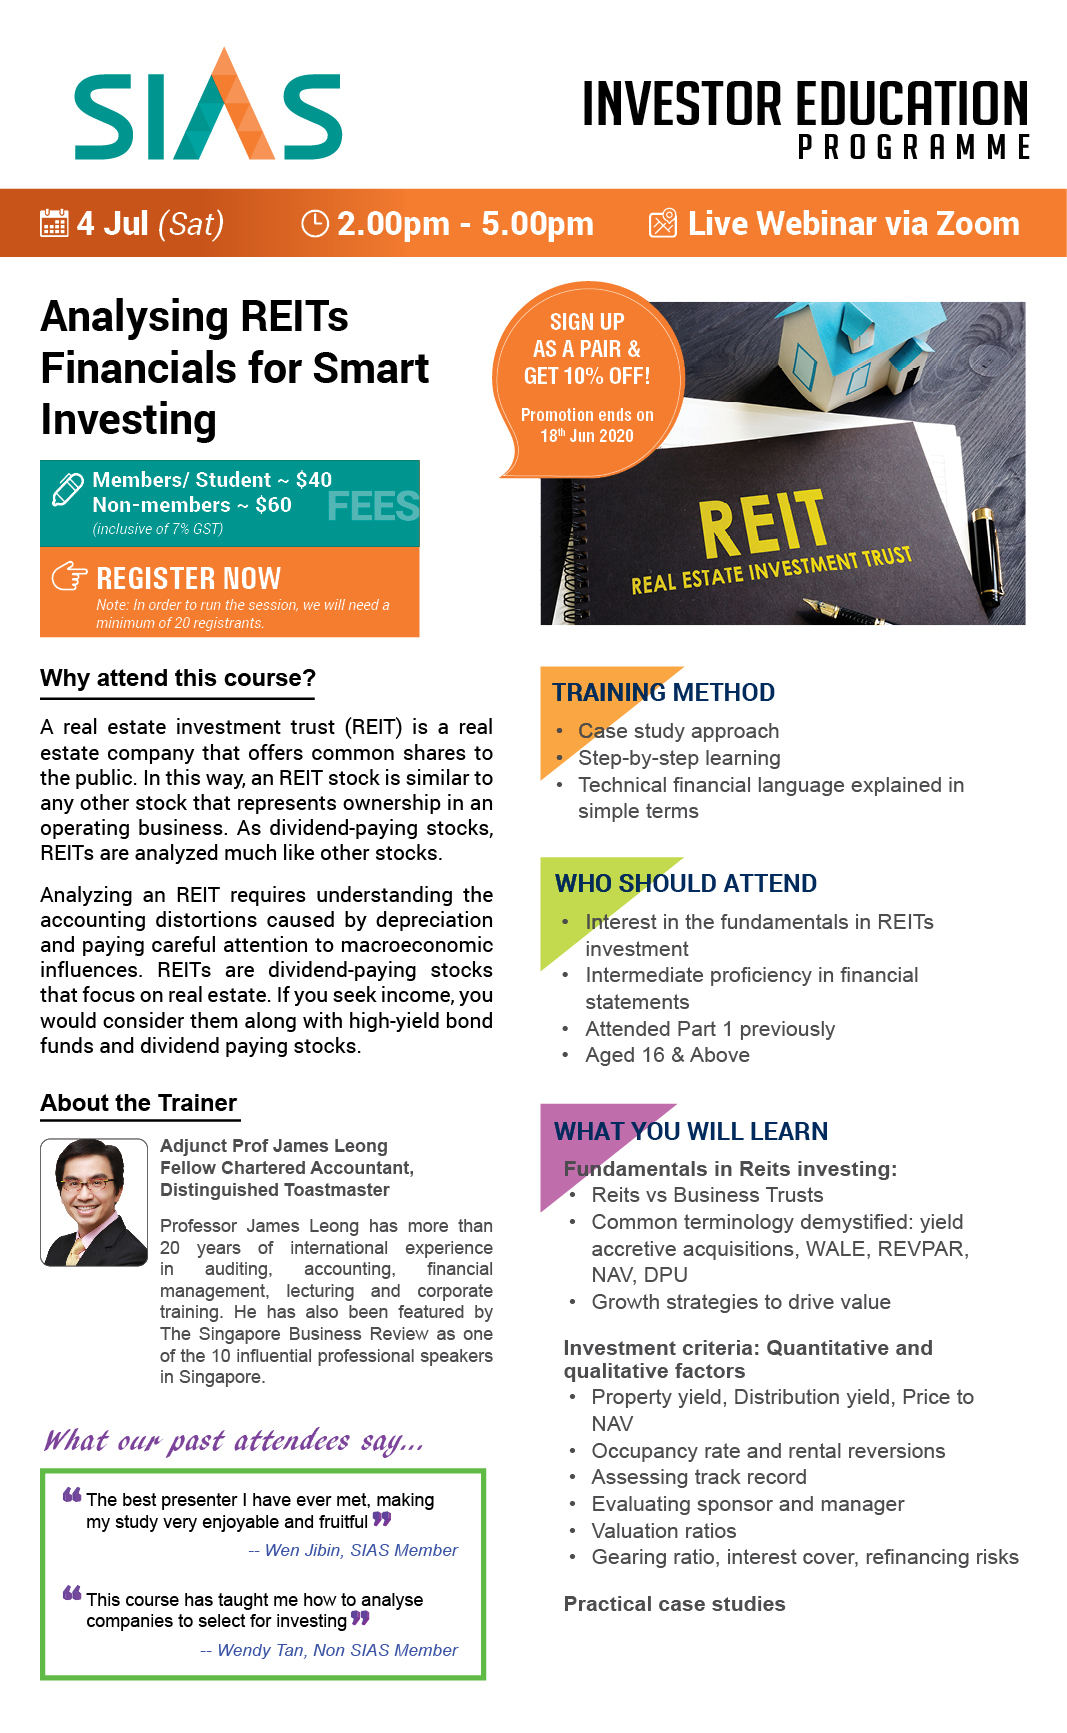 Analysing REITs Financials for Smart Investing